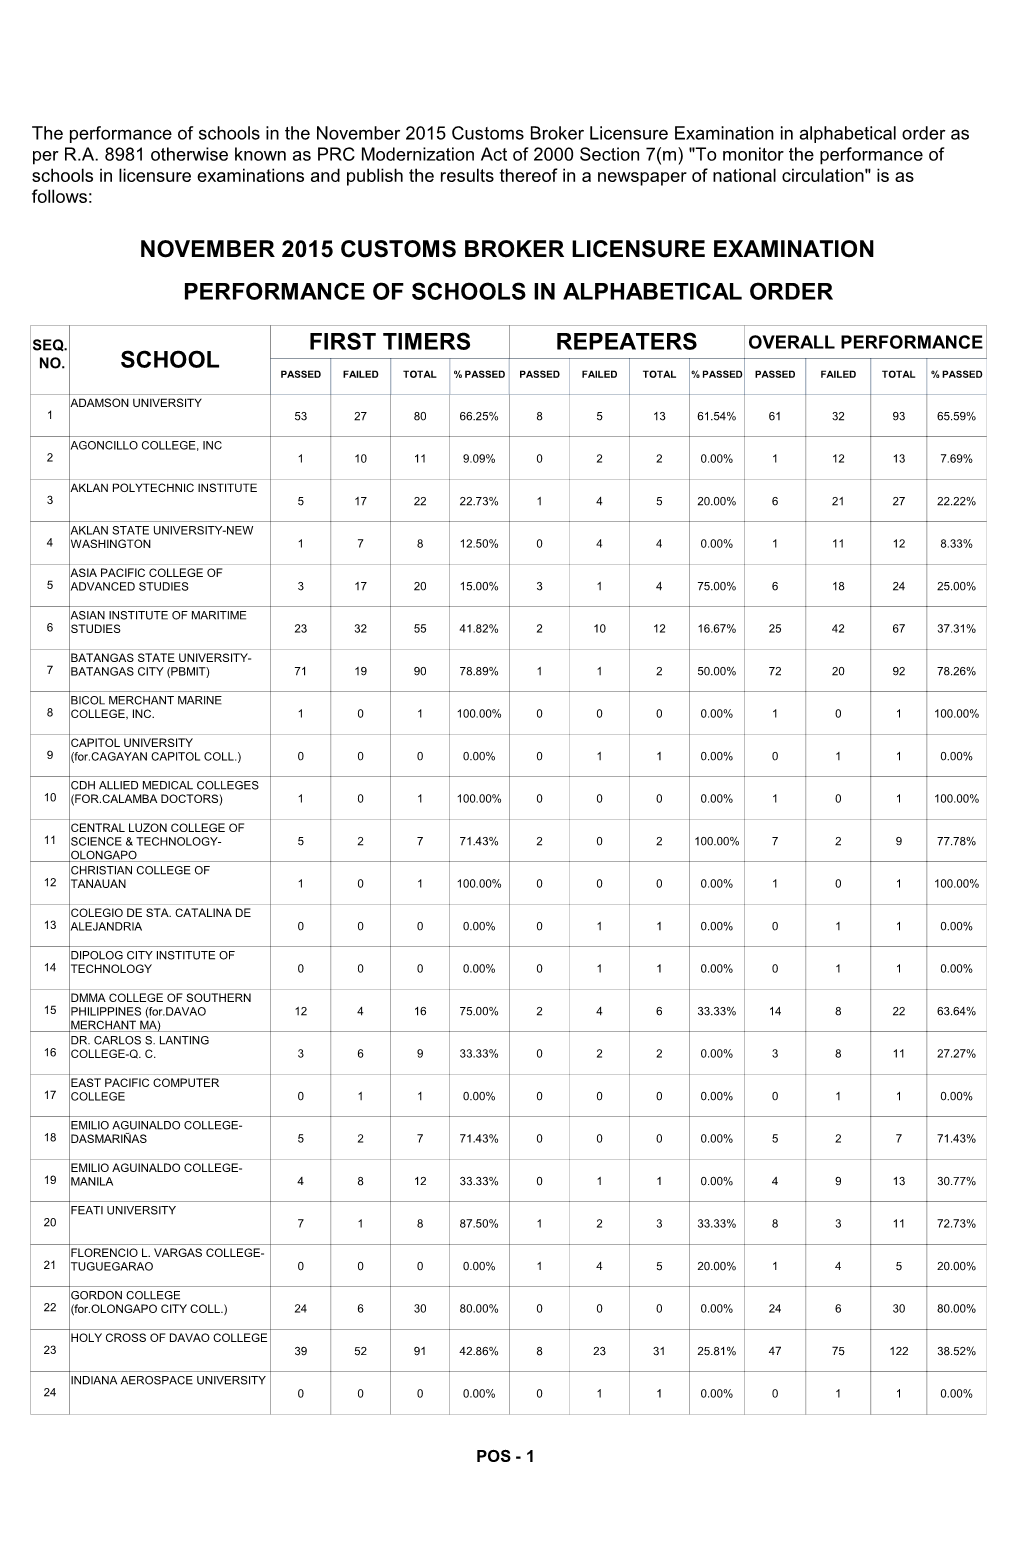 Performance of Schools in the November 2015 Customs Broker Licensure Examination in Alphabetical Order As Per R.A